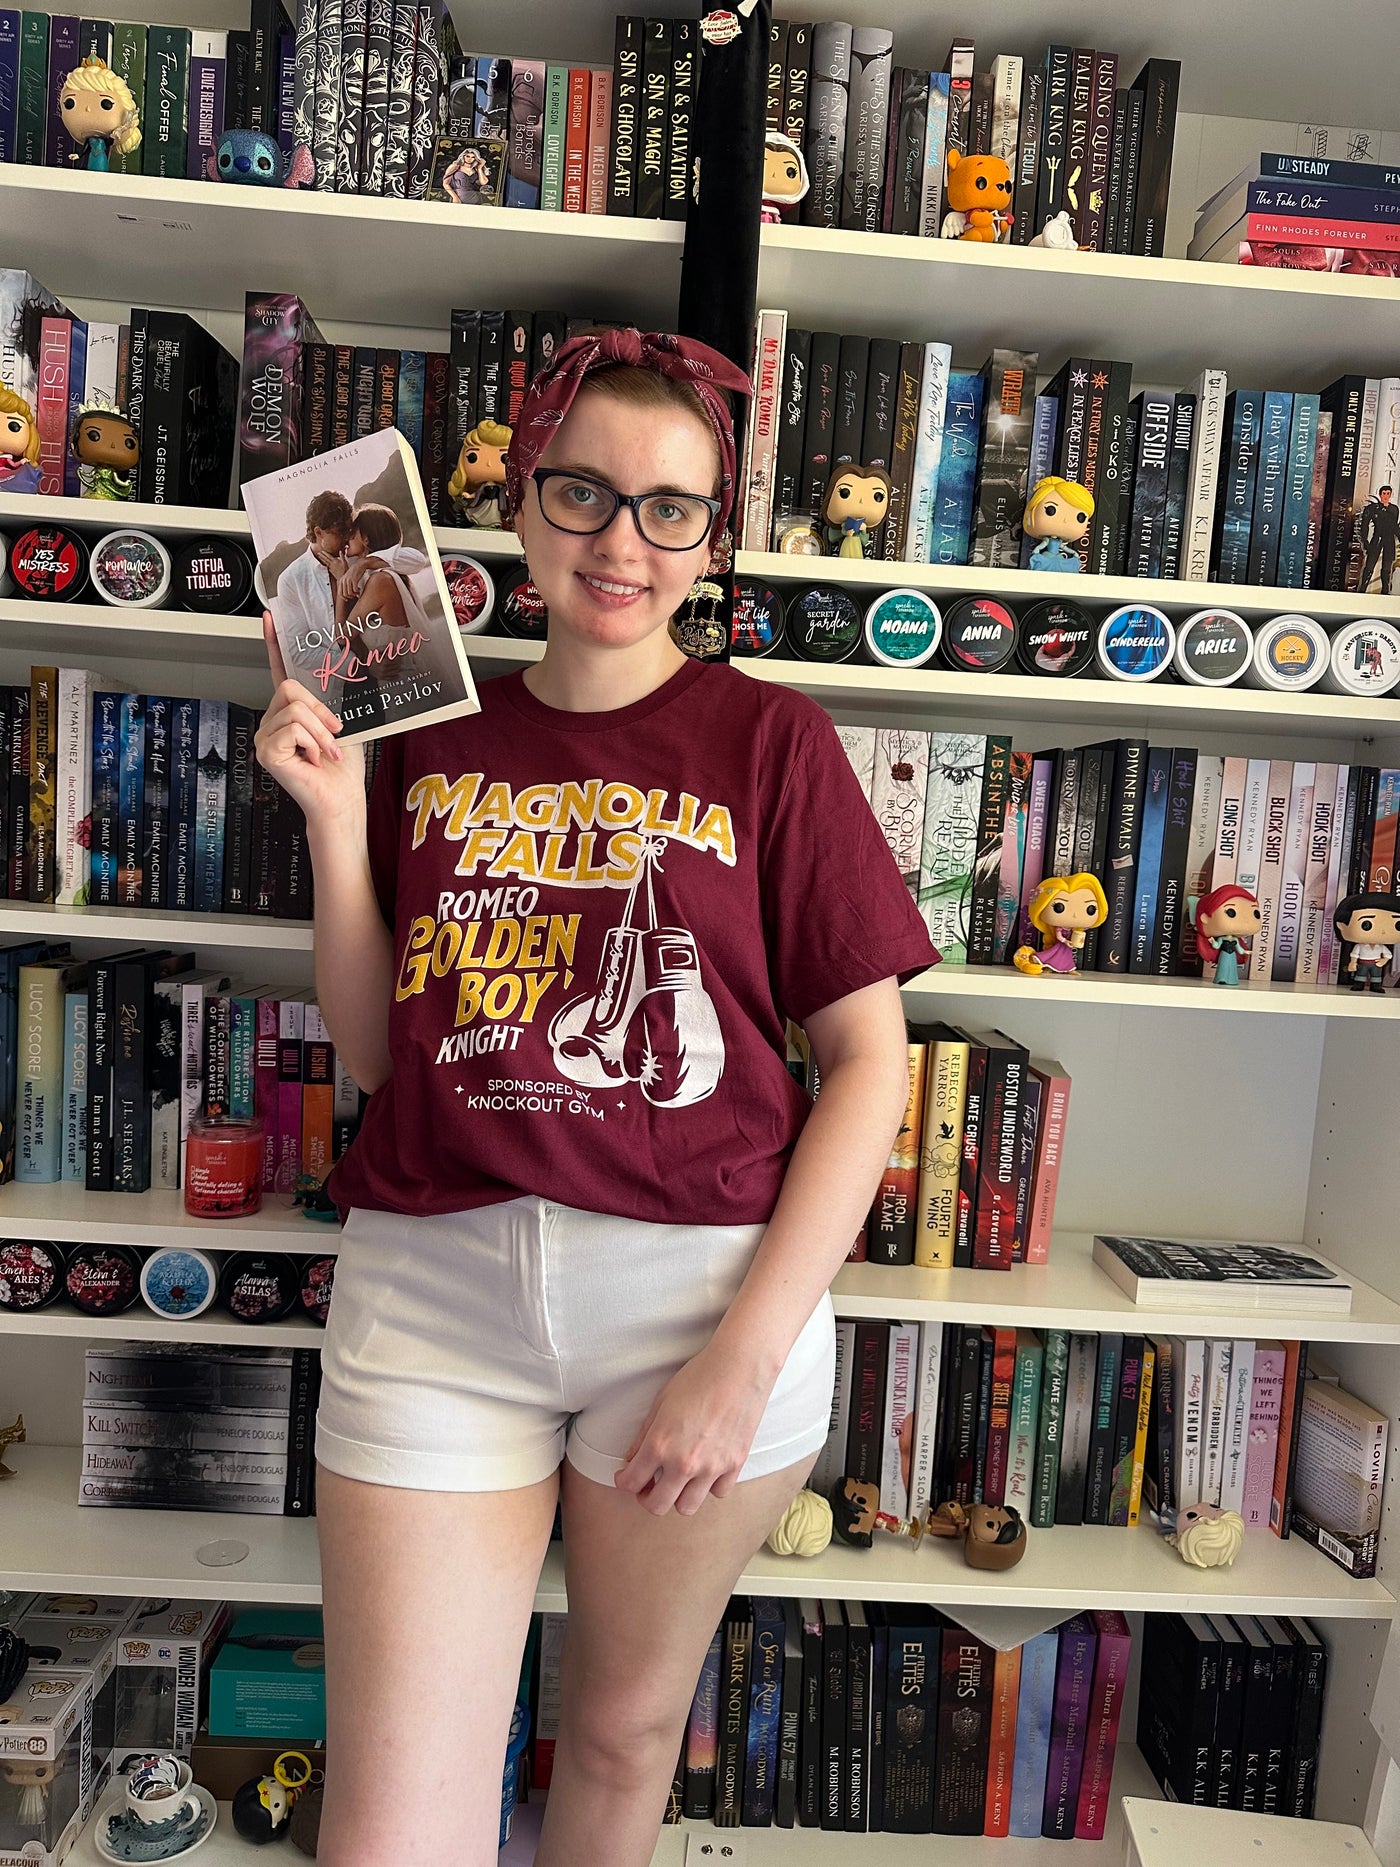 a woman in a red shirt and white shorts standing in front of a book shelf